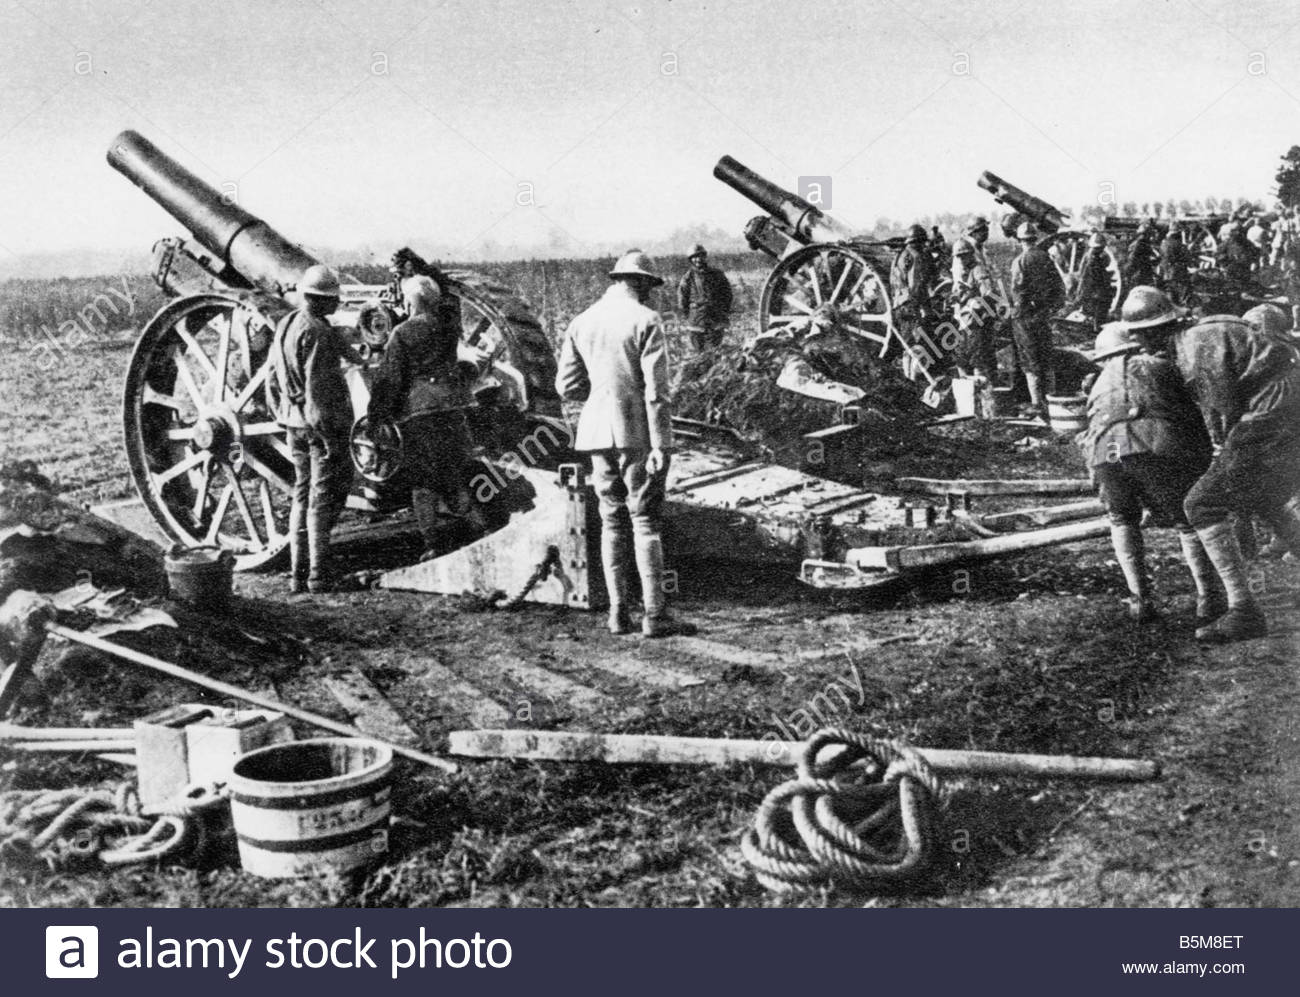 British guns at Battle of the Somme, summer 1916.